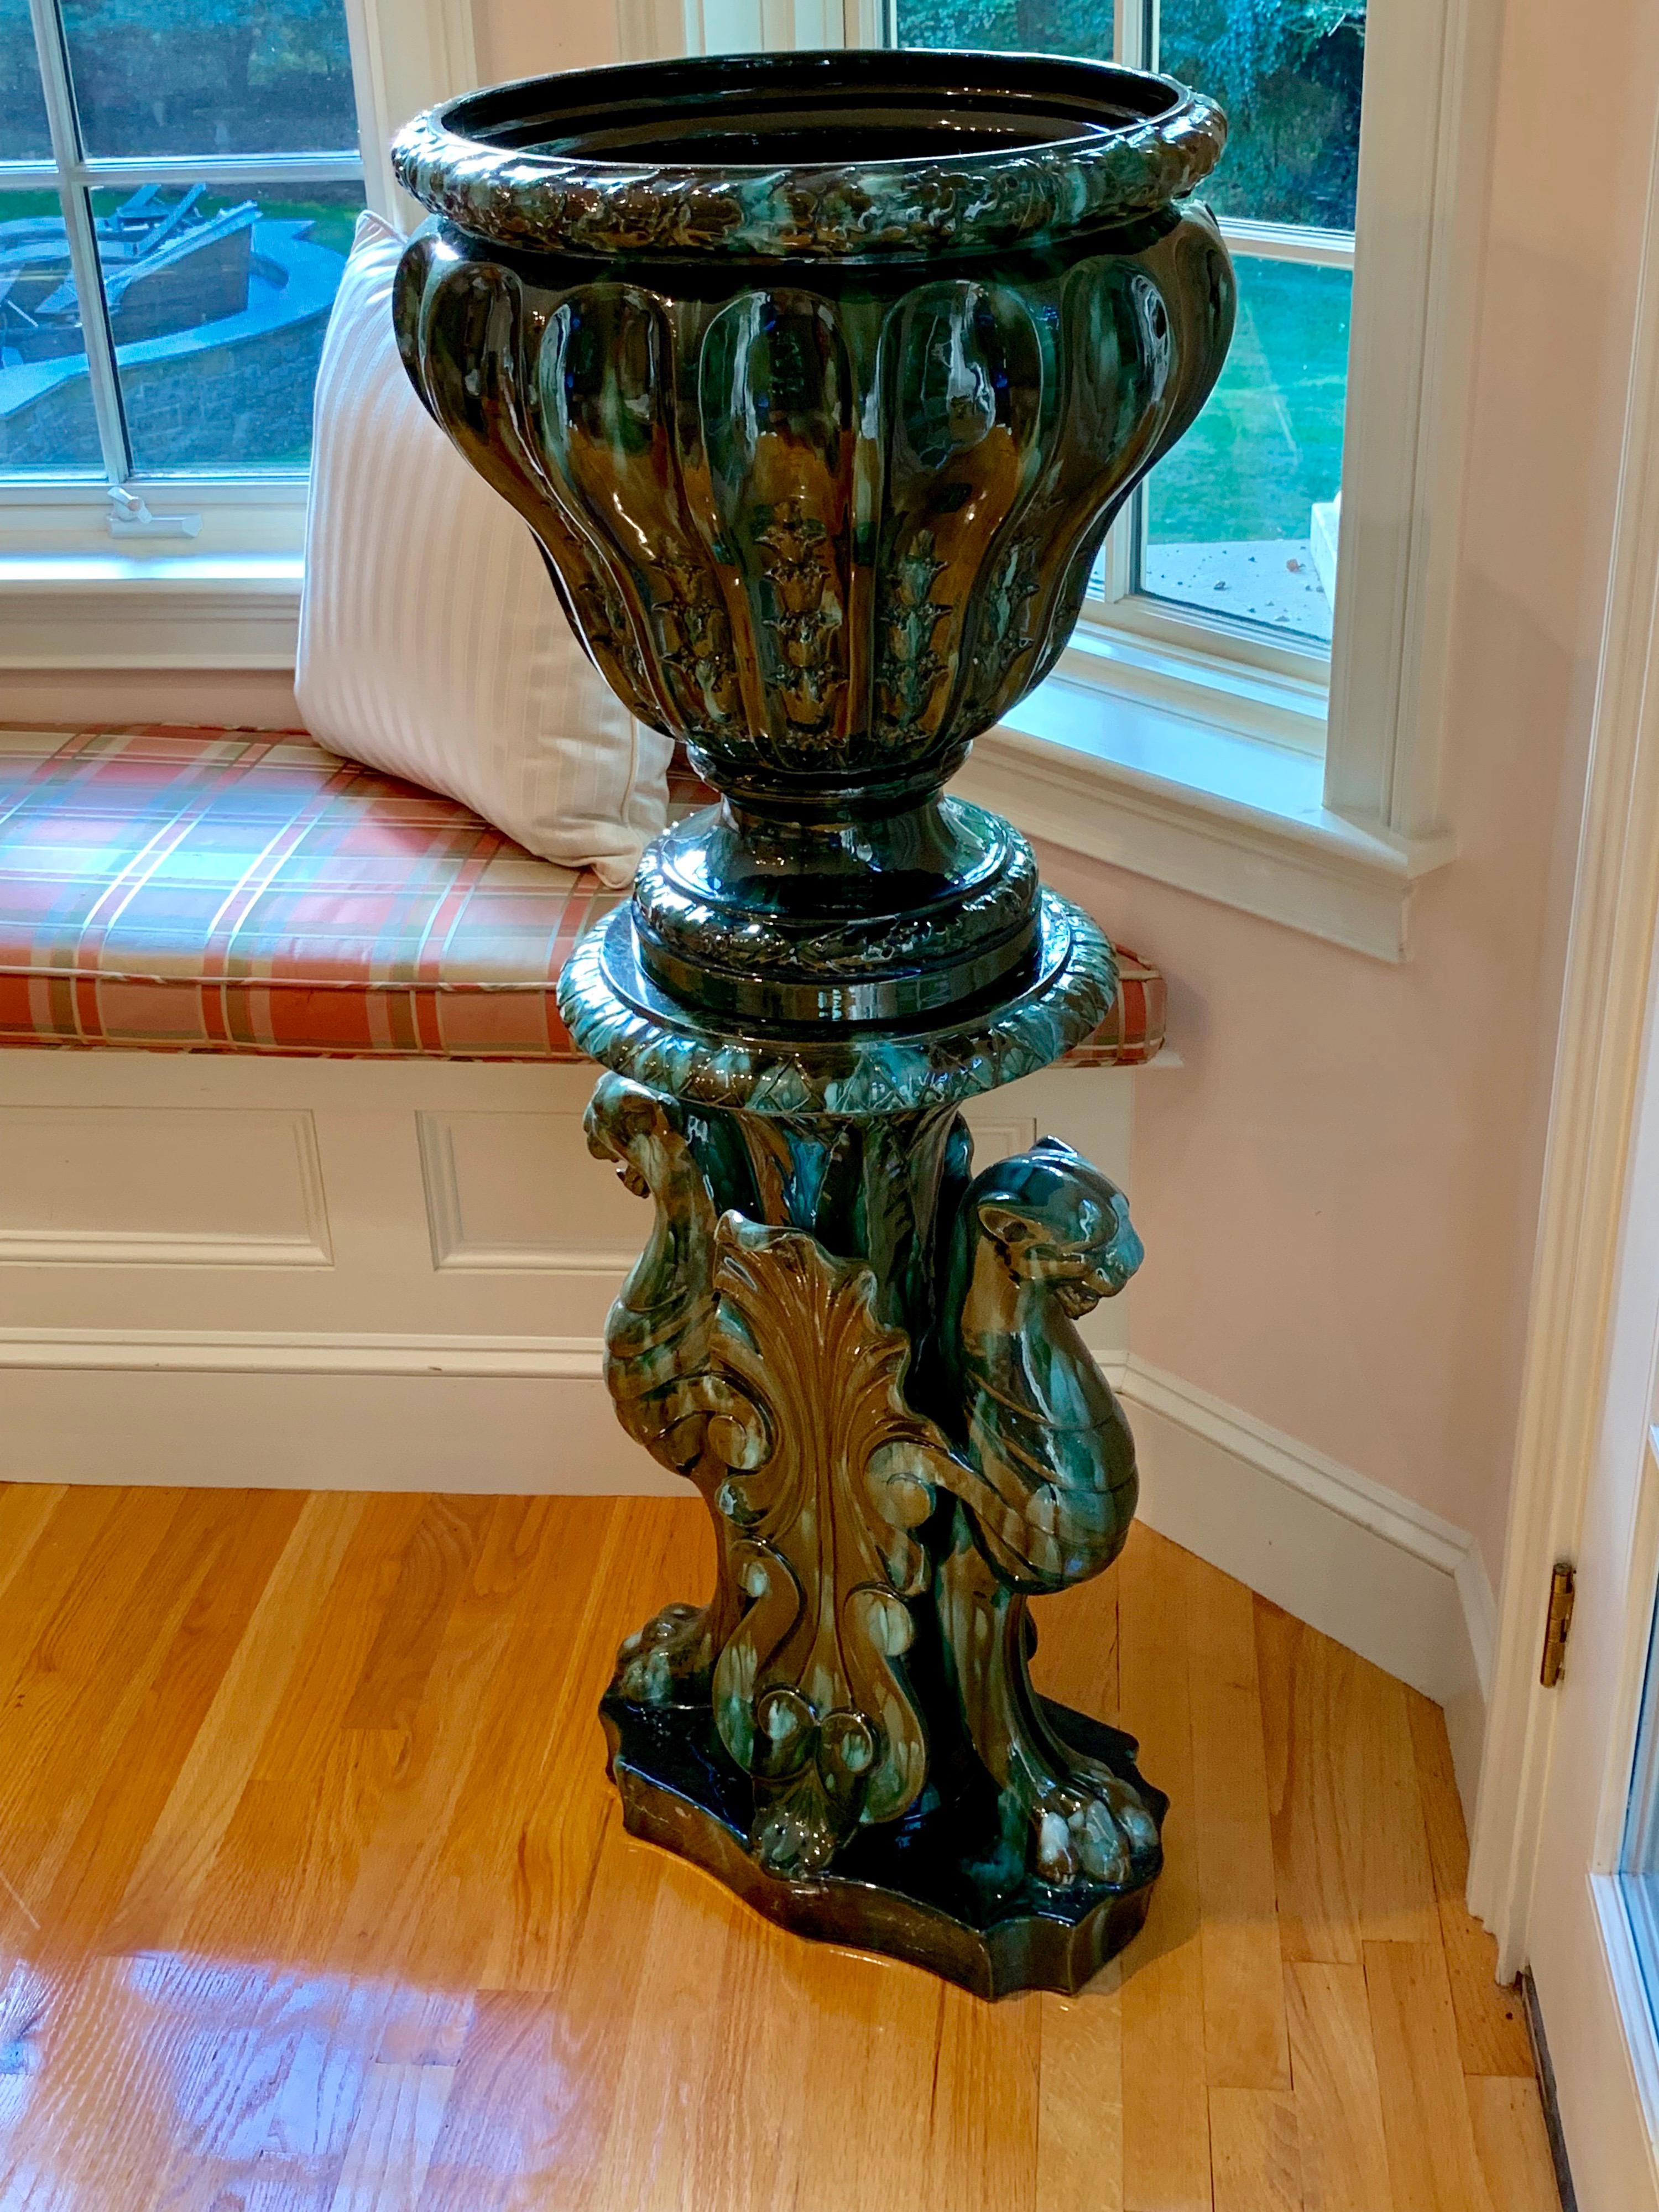 French neoclassical Majolica urn on stand by Clement Massier, circa 1890.
The tripod like base has 3 stylized lions, the green/blue hues of this vase are magical as the light hits them, changing the color depending on the reflection.